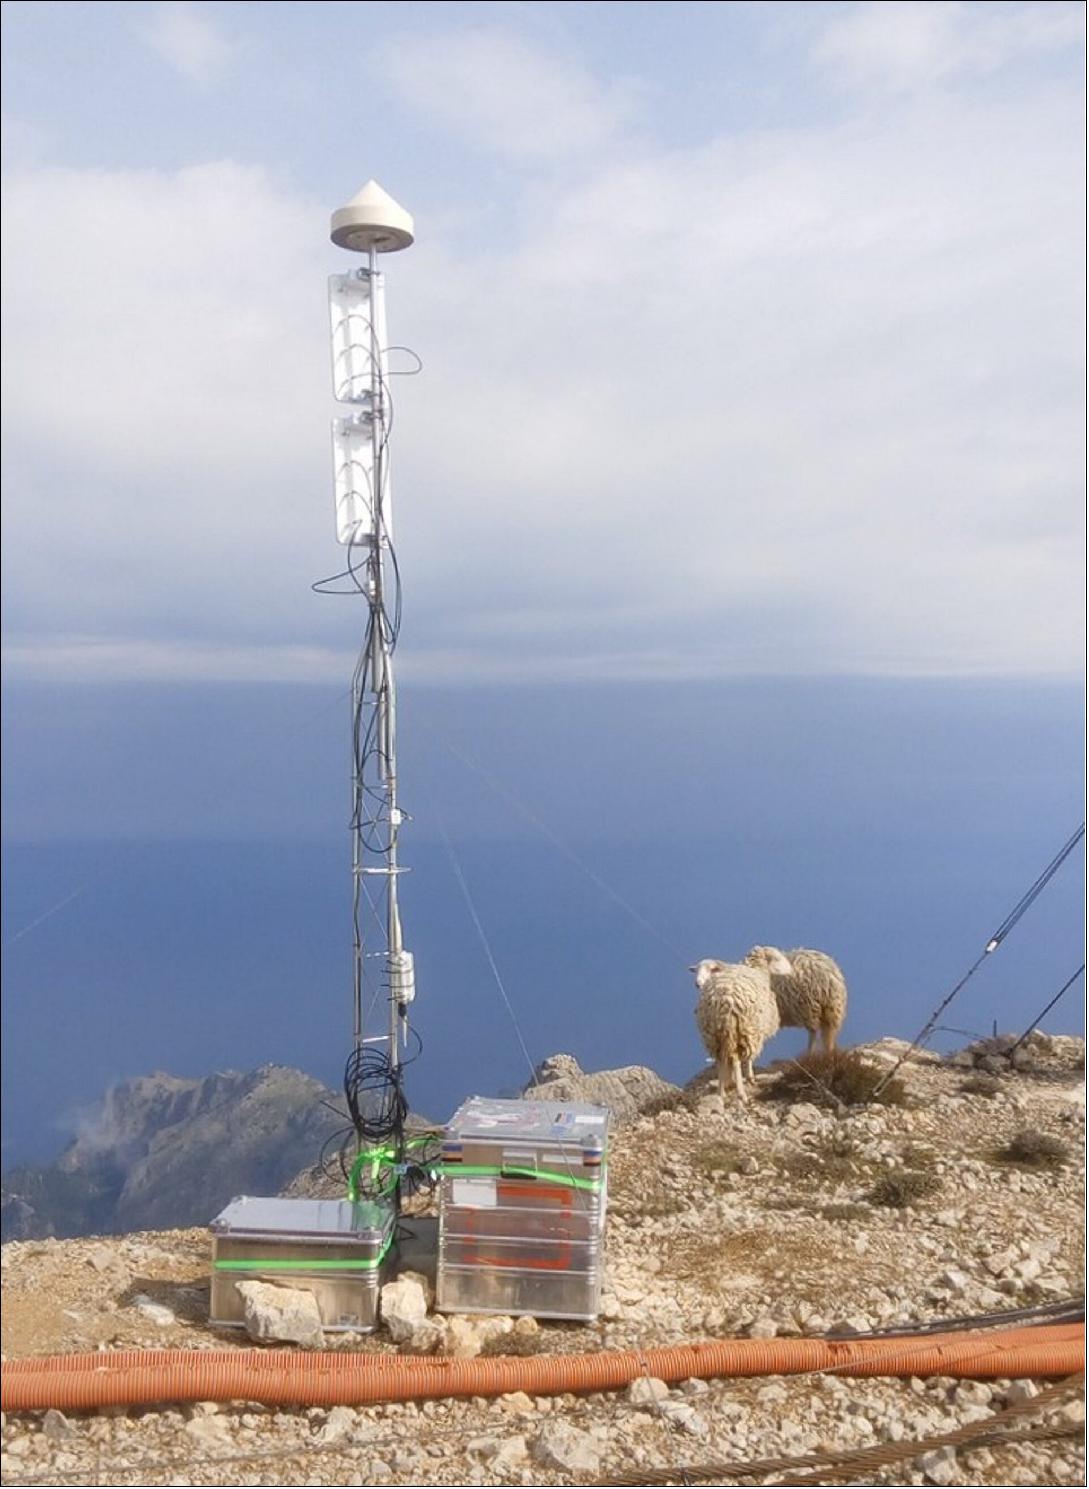 Figure 32: An experimental satellite navigation receiver station high atop Spain's Mallorca island has opened up a novel view of the ever-changing face of the sea. By picking up satnav signals from the far horizon as they bounce off ocean waves, the receivers are able to measure sea surface height down to a scale of centimeters. A pair of satnav receivers was positioned in a near-horizontal orientation, 1400 m above sea level atop Mallorca's highest peak, 4 km from the coast, seen here with grazing sheep (image credit: Institute for Space Studies of Catalonia)